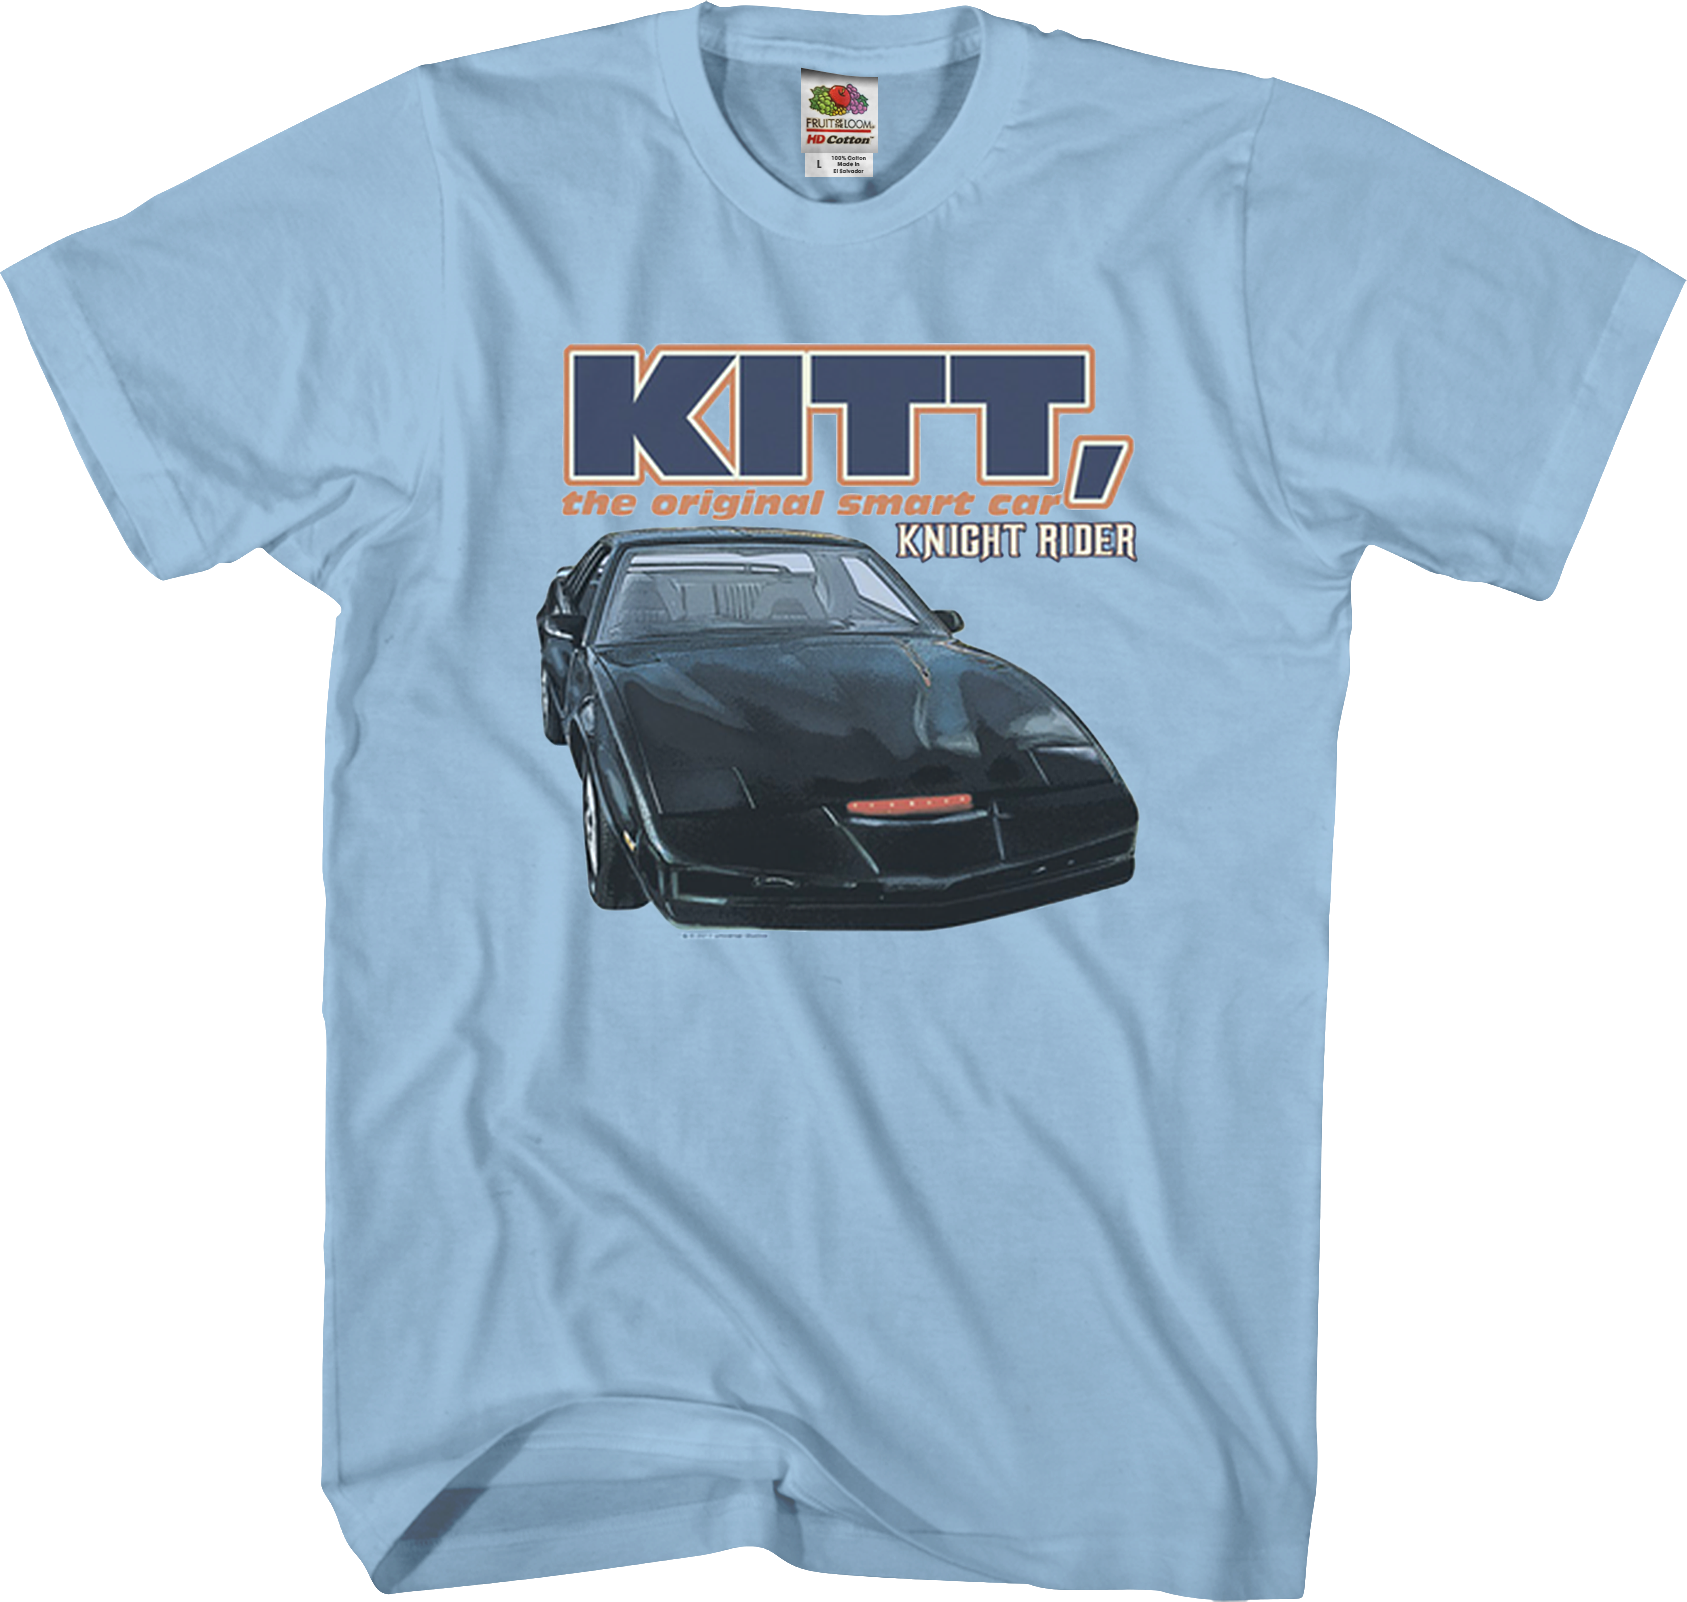 Knight Rider Car - The History and Features of K.I.T.T.